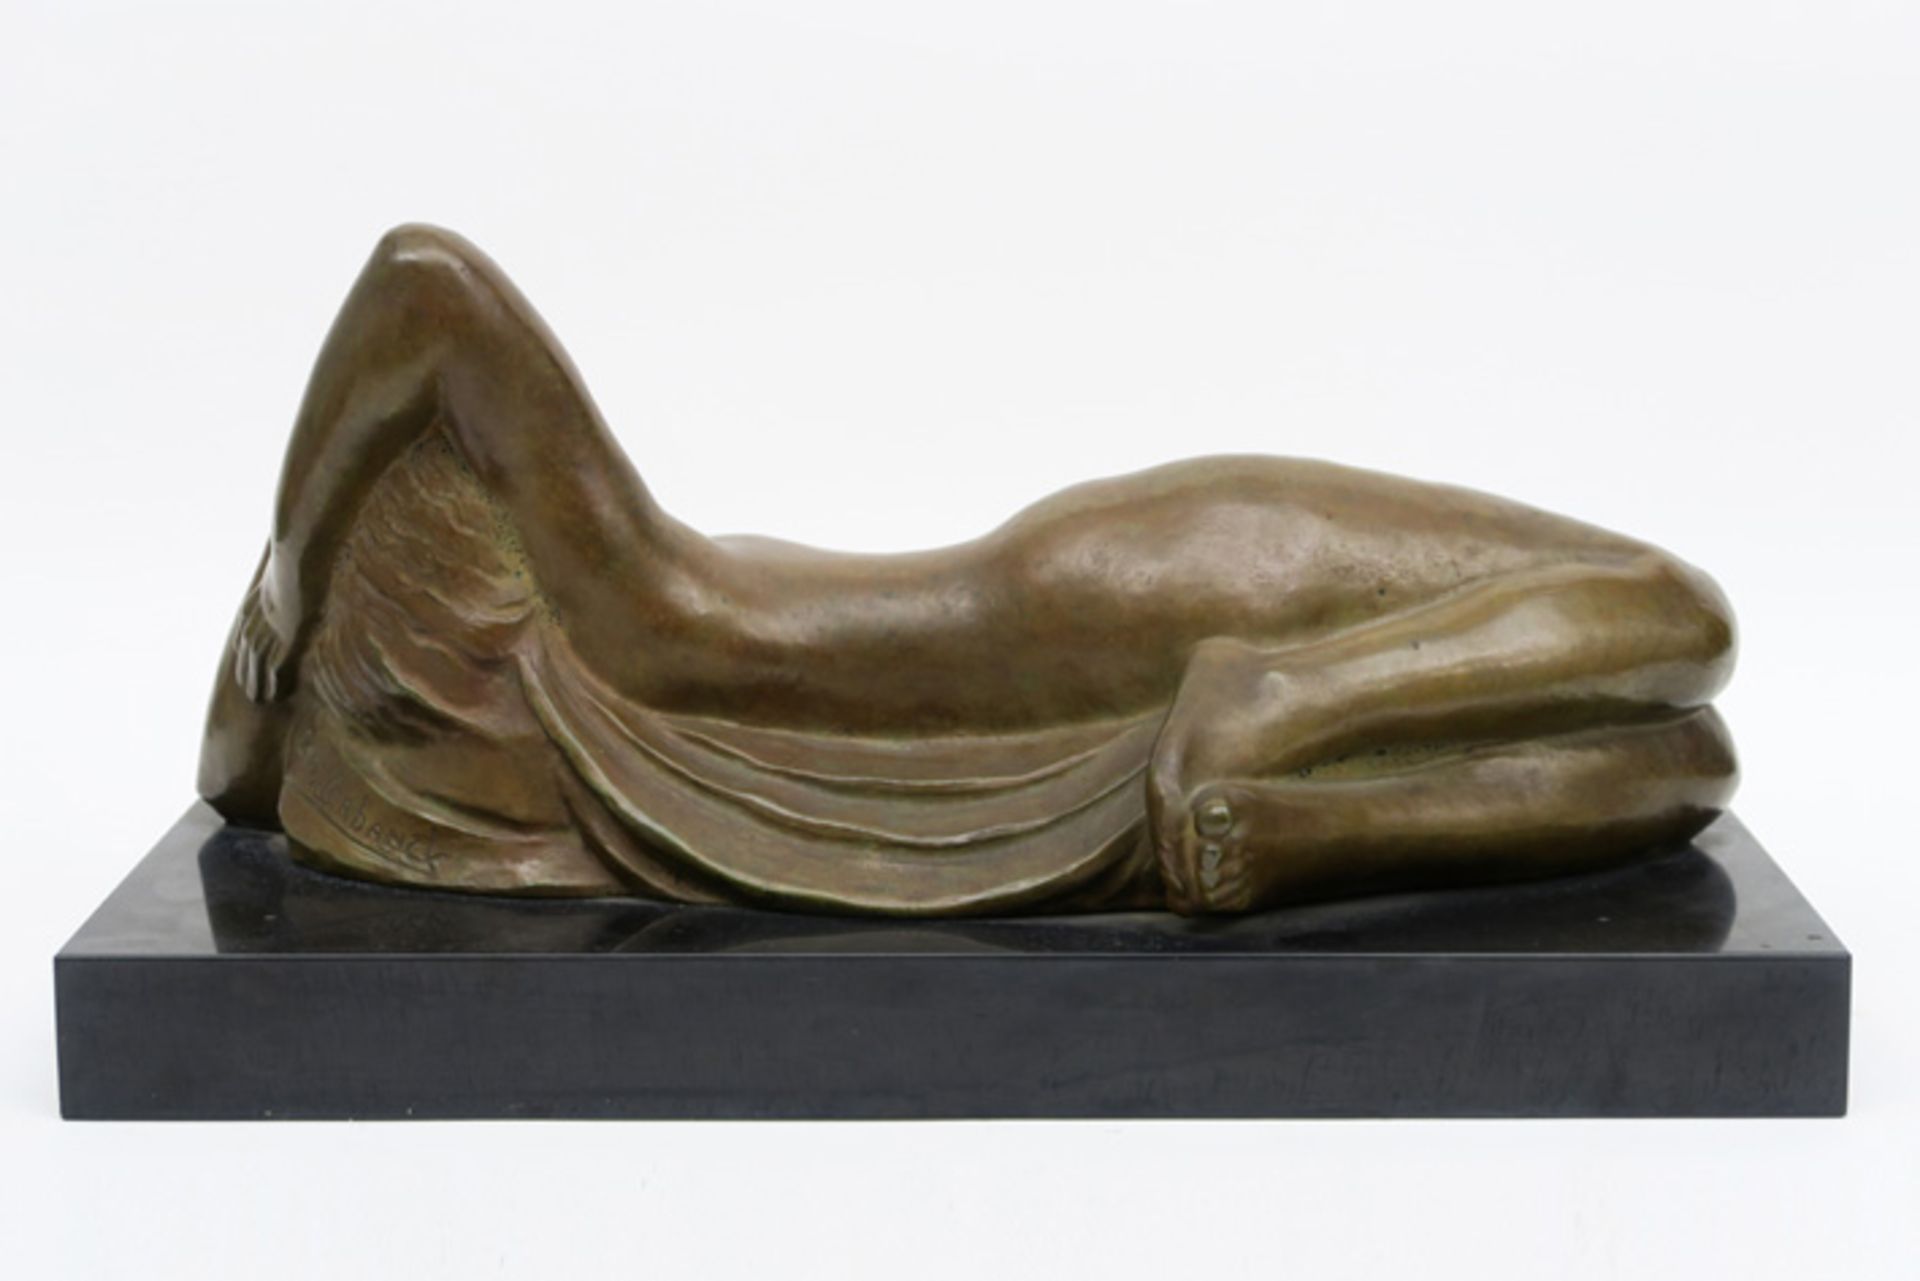 20th Cent. Belgian "reclining nude" sculpture in bronze - signed Geo Verbanck and with foundry - Bild 2 aus 4